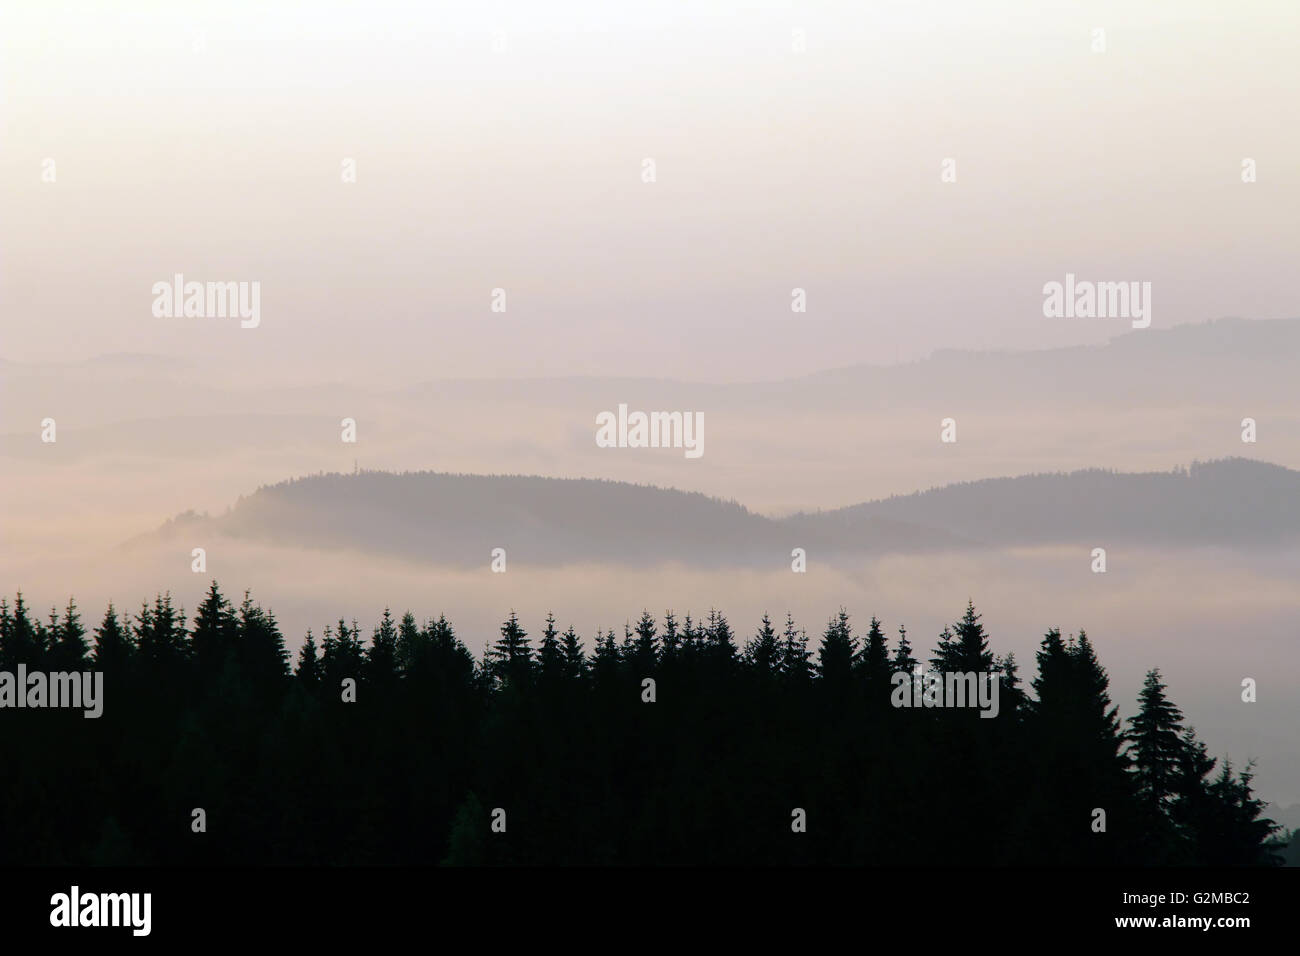 Forested hills in early morning mist Stock Photo